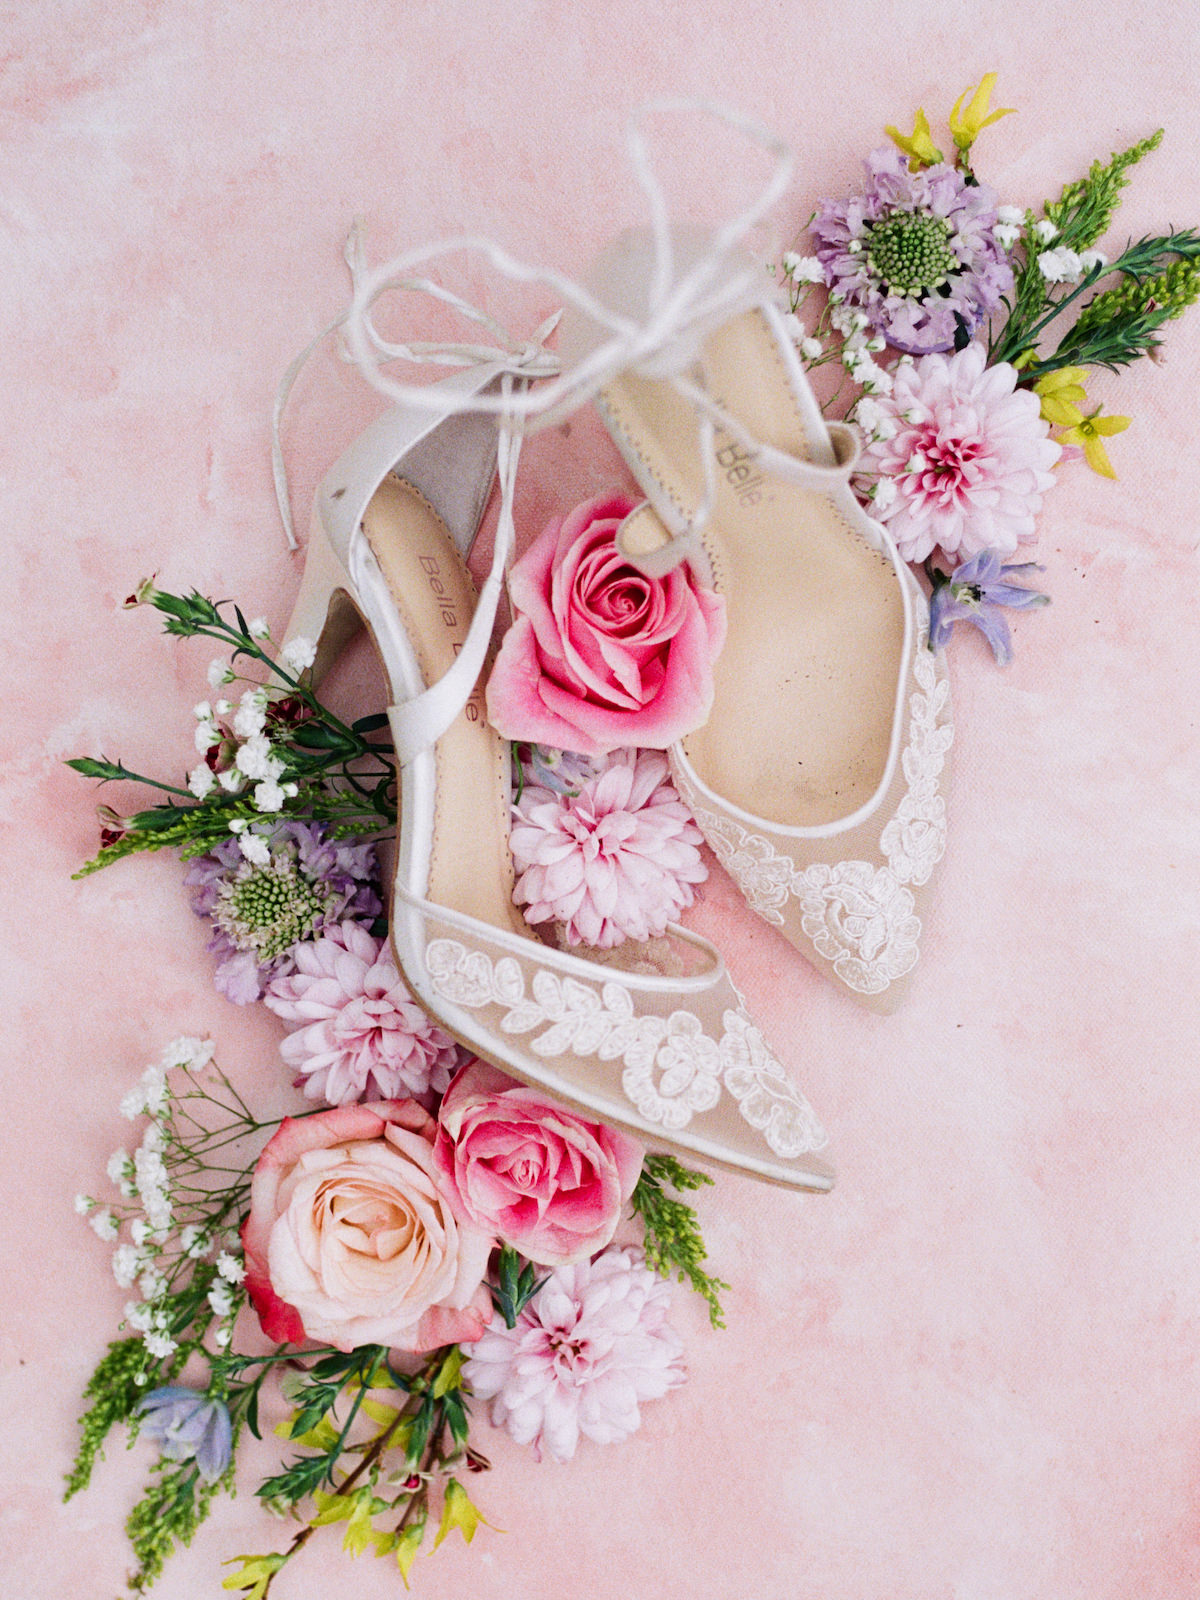 Tampa Styled Shoot European Pastel Spring Wedding Inspiration | Illusion Lace Pointy Toe Bridal Shoes Shot with Colorful Bright Flowers